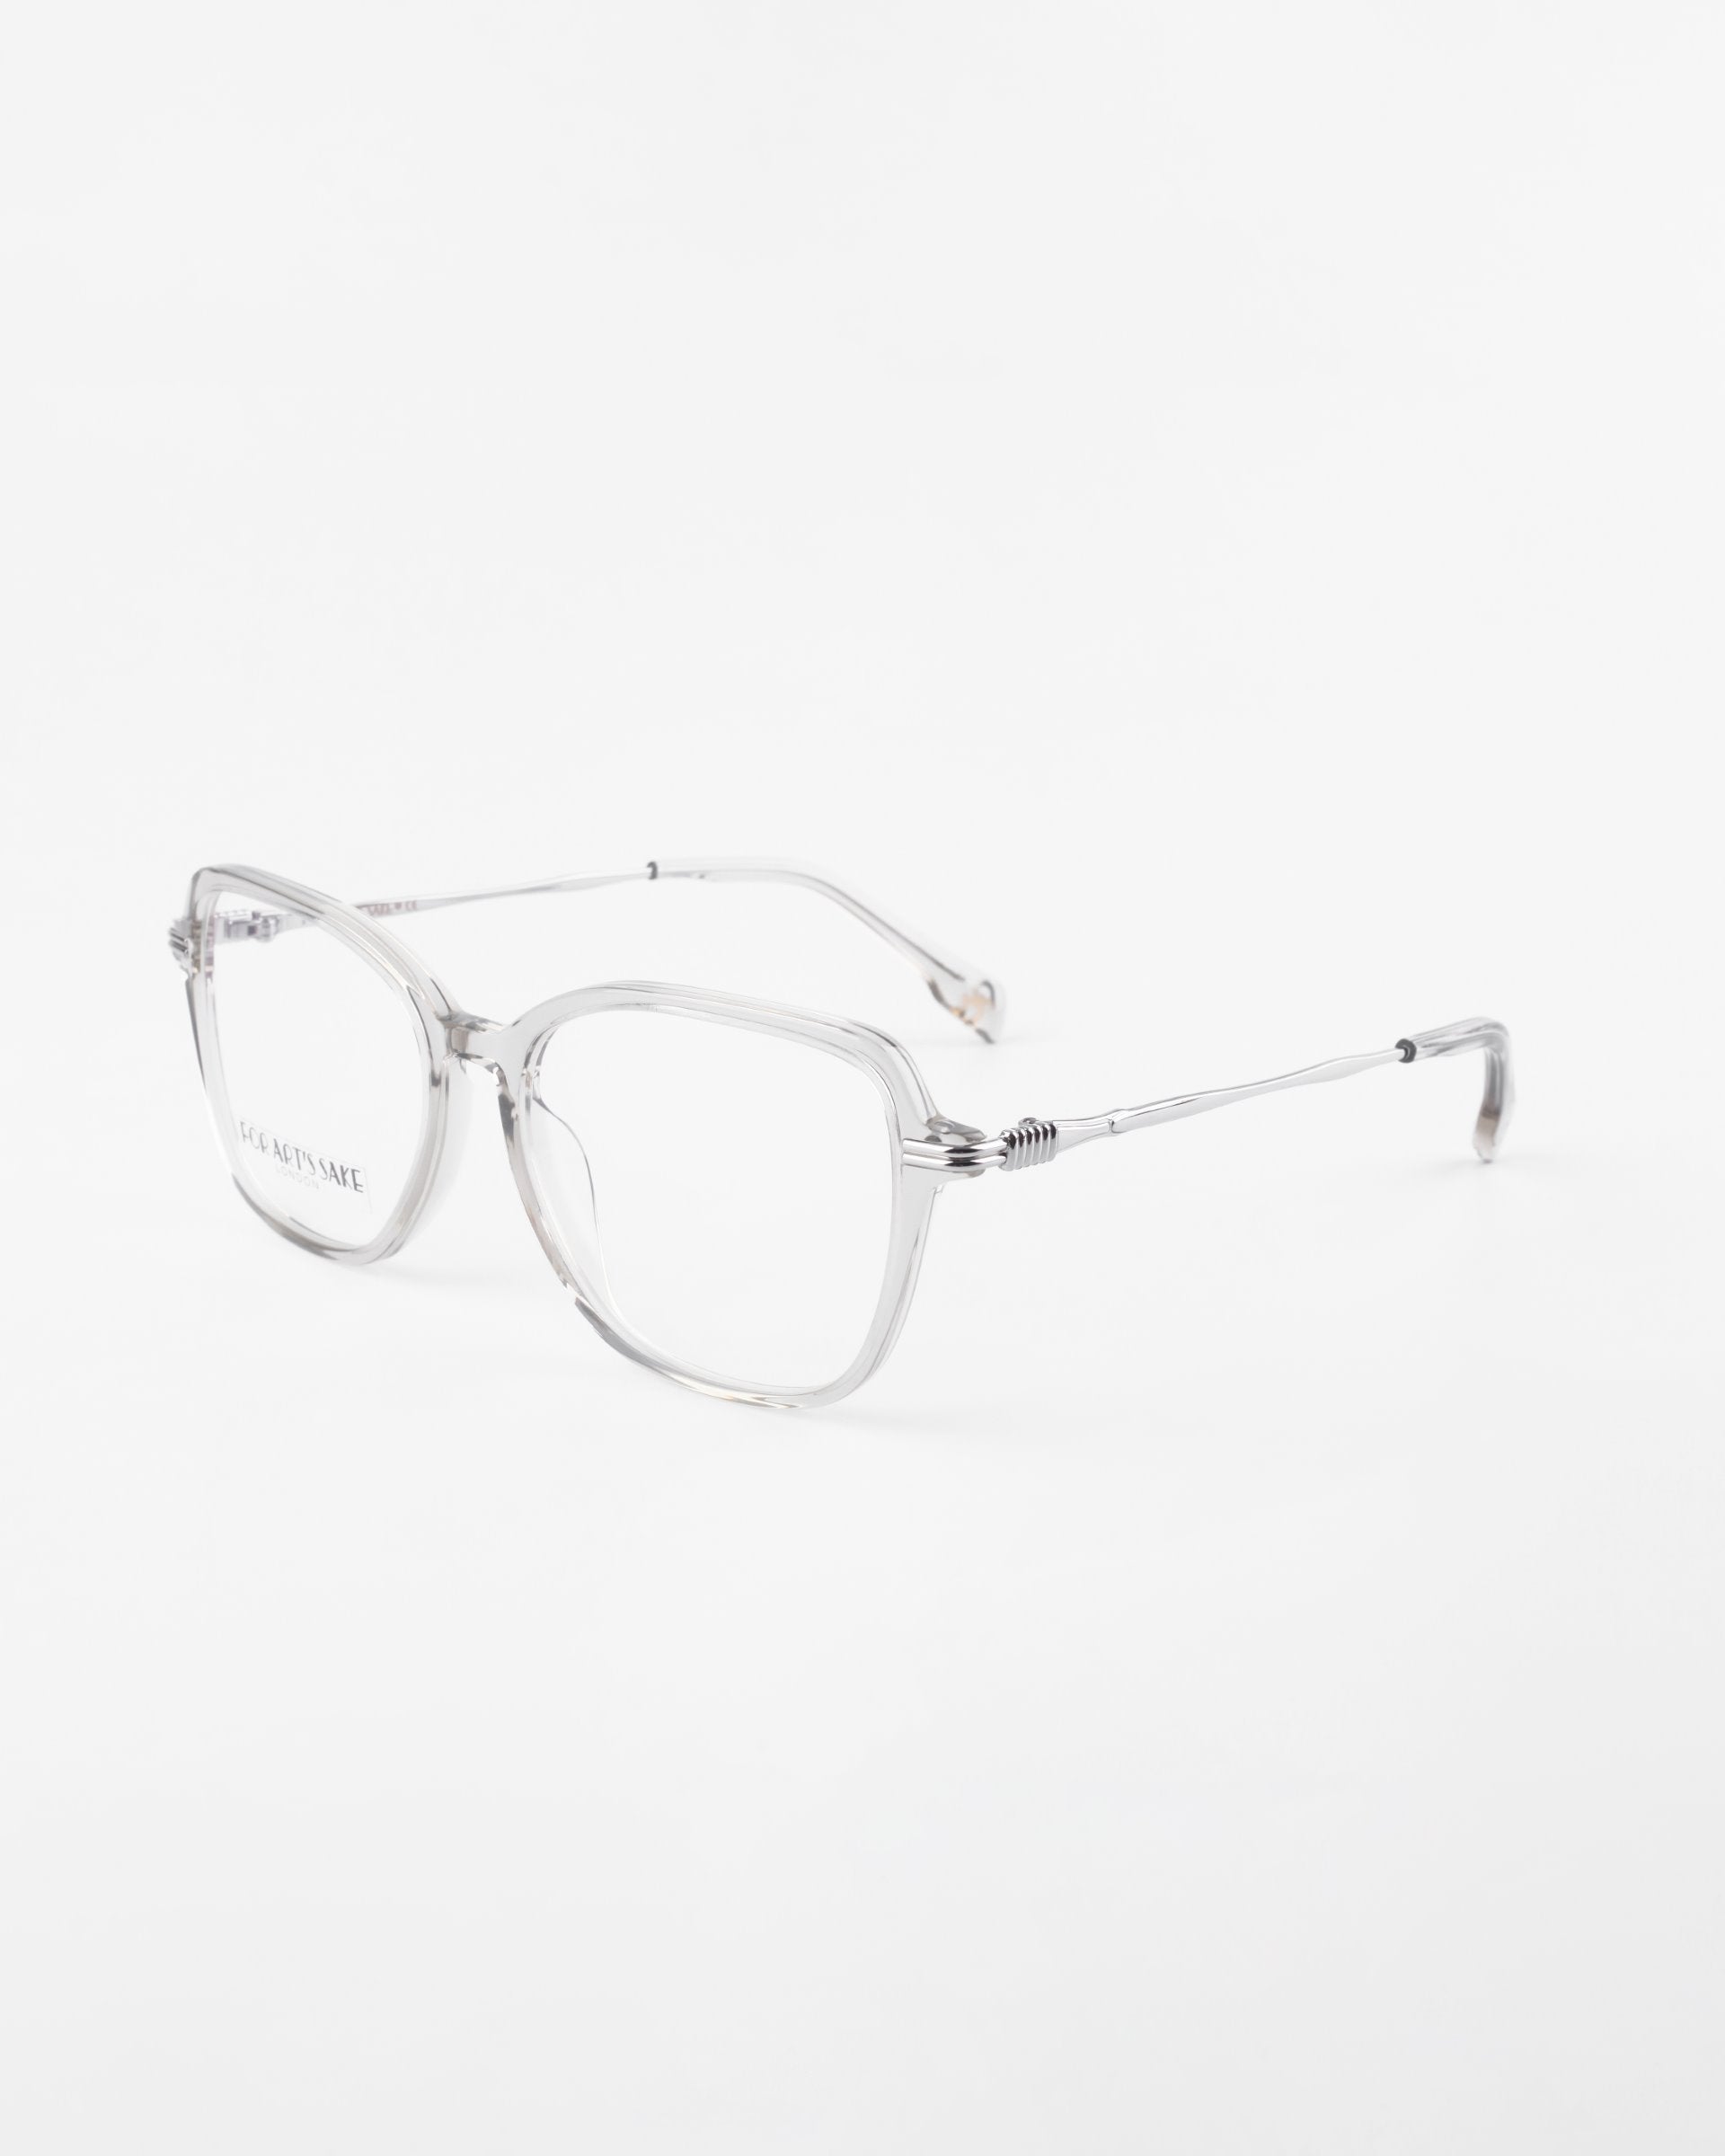 A pair of clear, square-framed eyeglasses with thin temples and a minimalist design set against a plain white background. The Sonnet by For Art&#39;s Sake® appear modern and lightweight, showcasing a streamlined and elegant aesthetic.